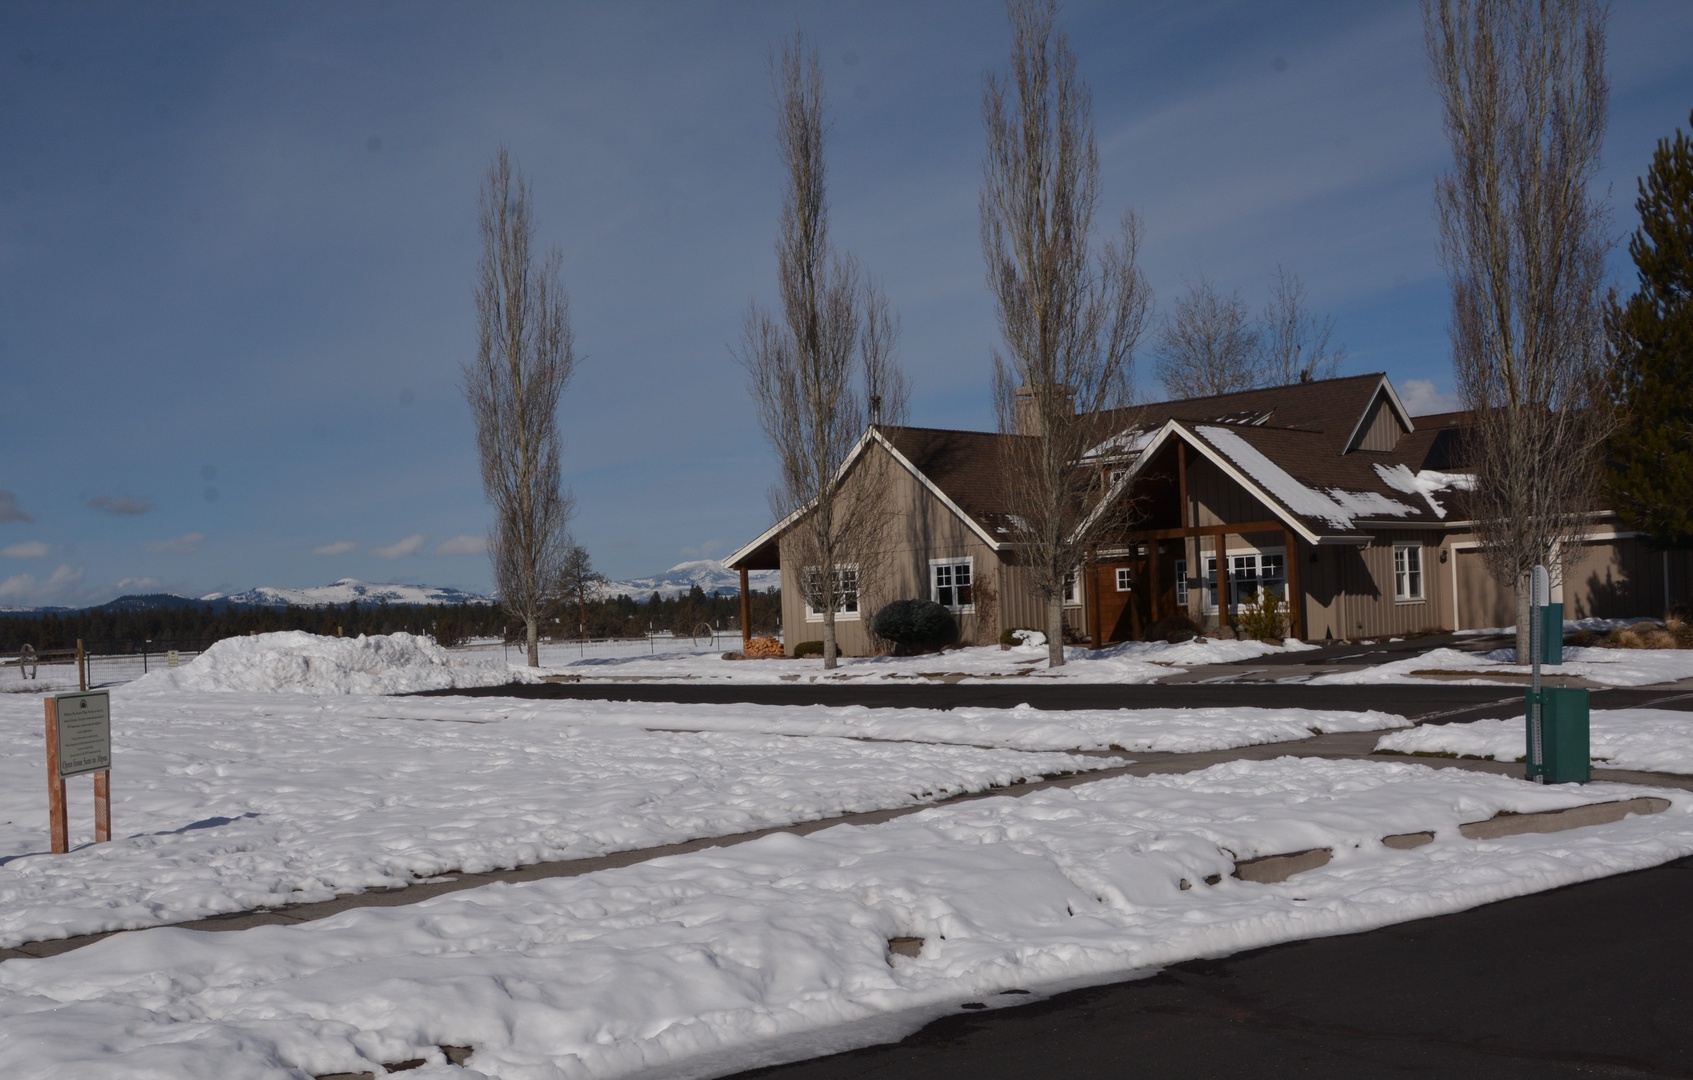 Enjoy the fabulous views & amenities this community has to offer!